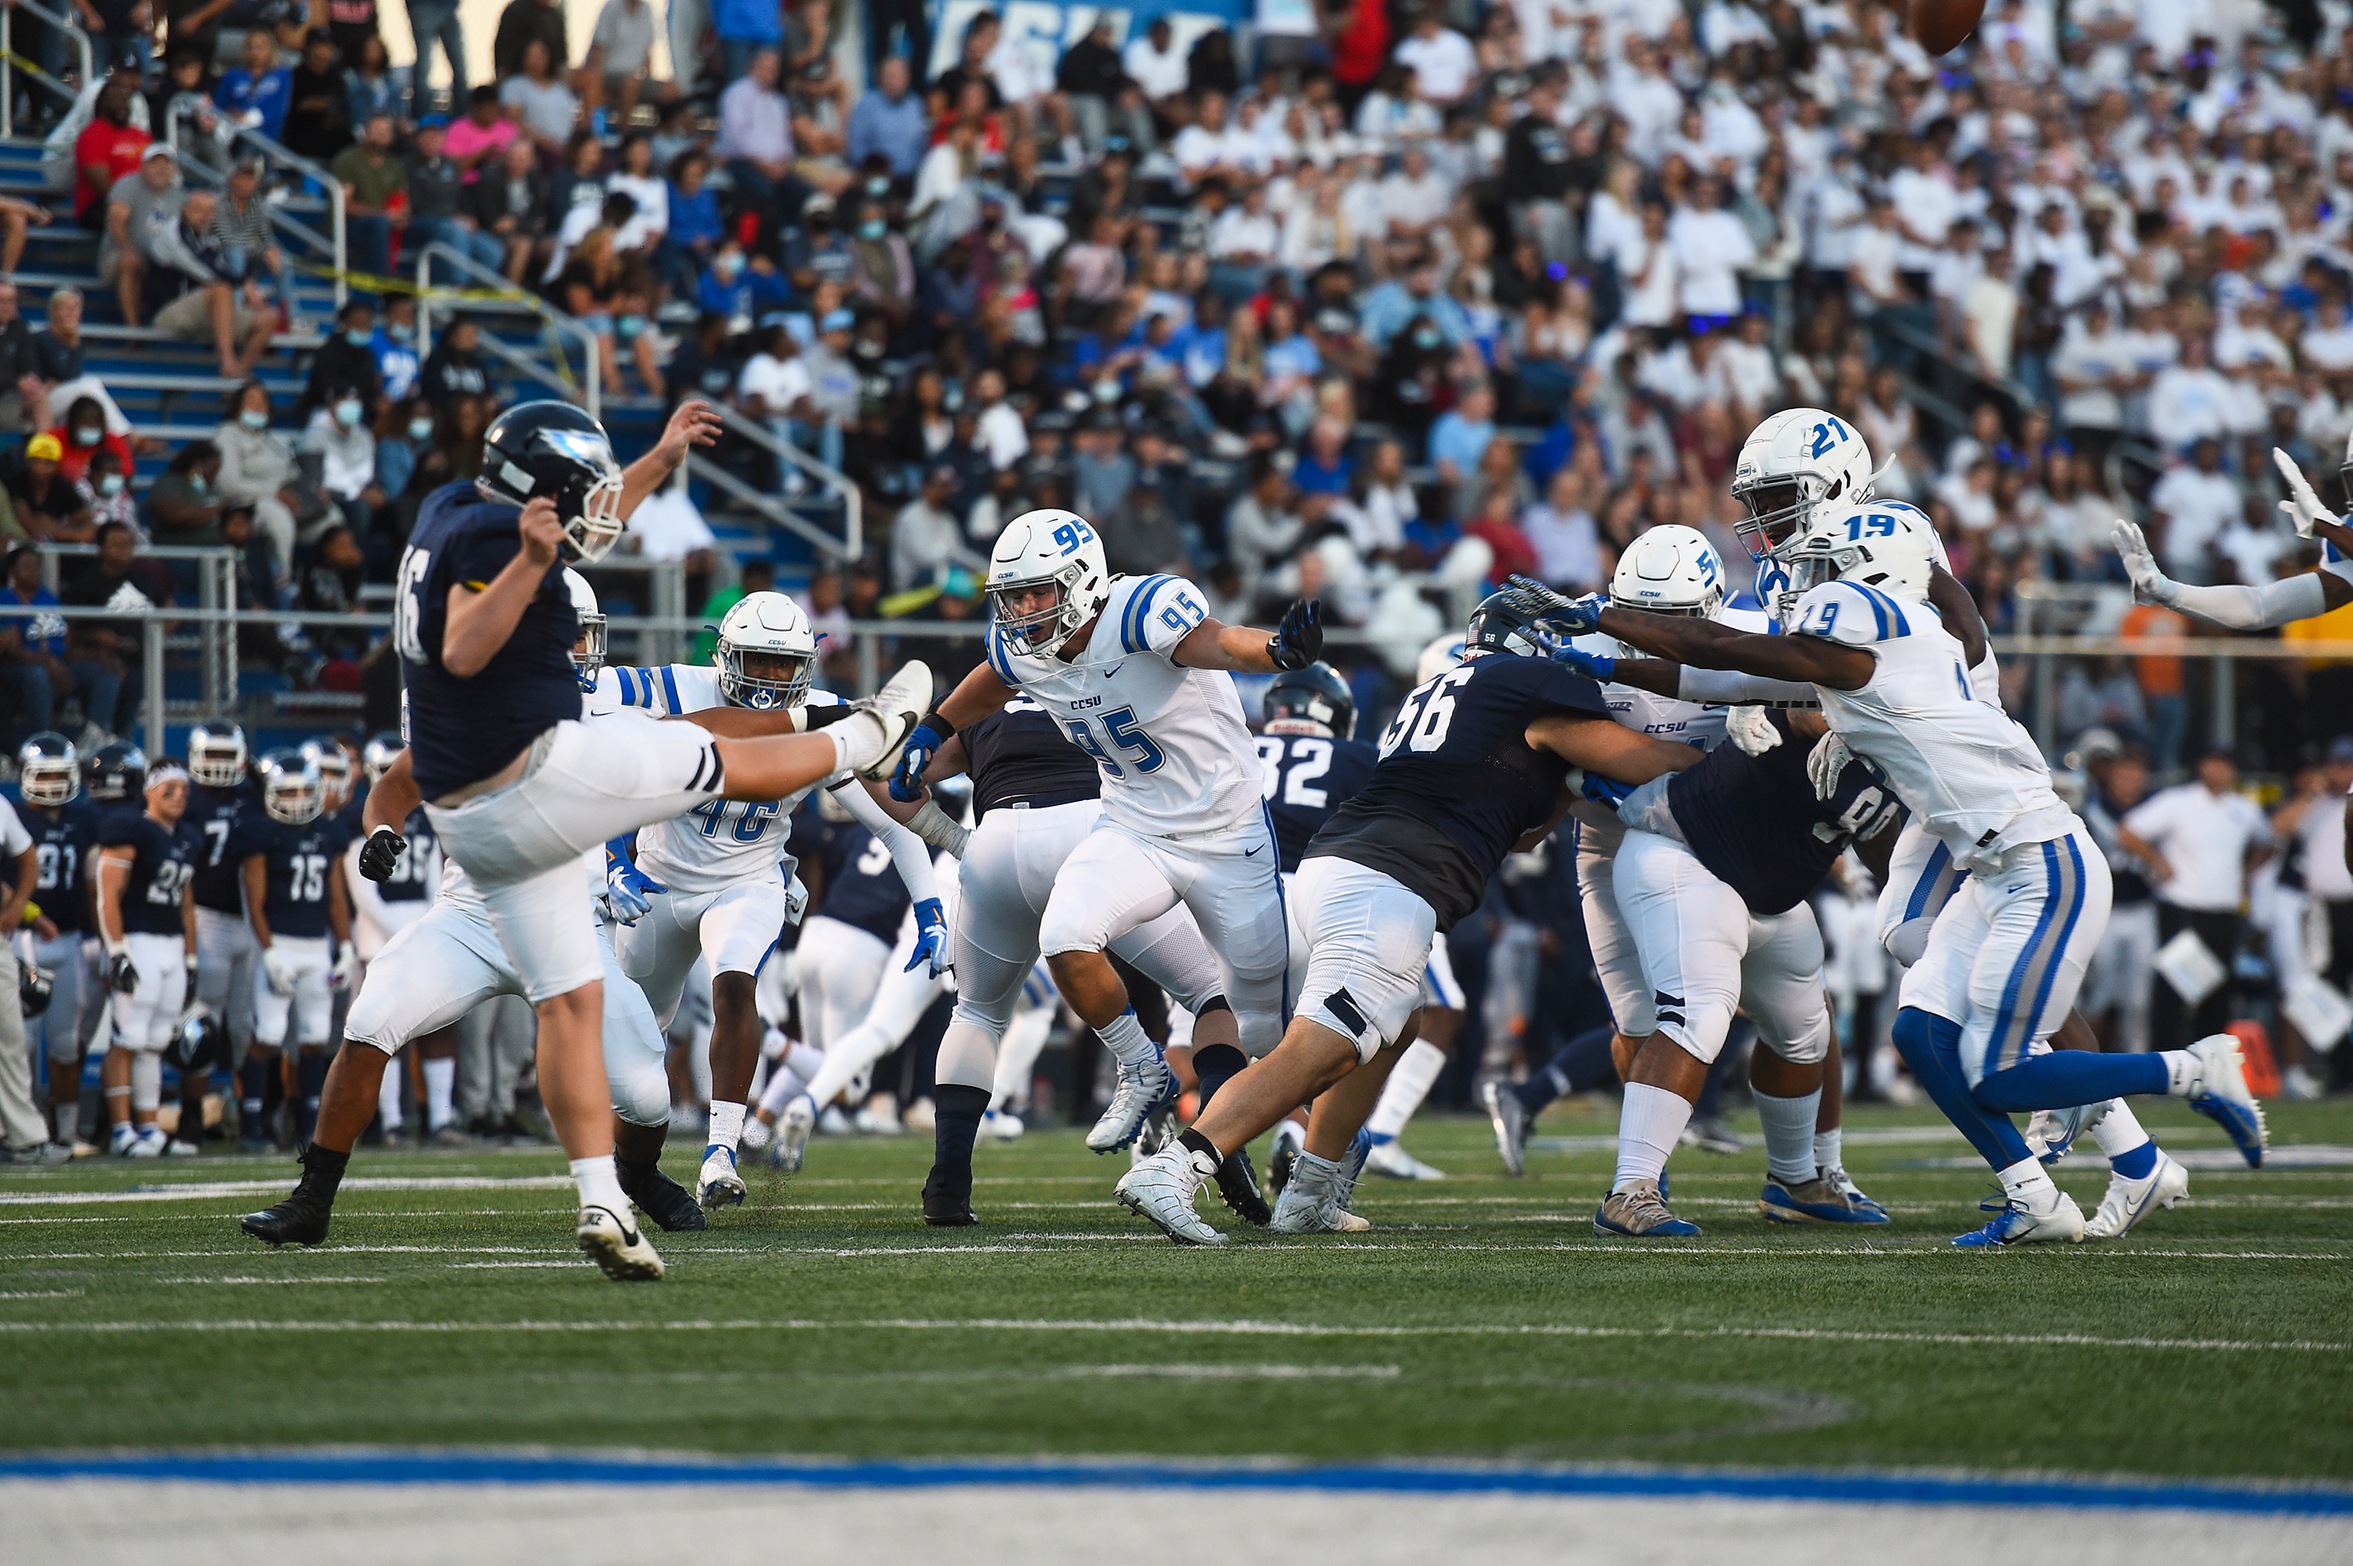 Football Drops Season-Opener to Southern Connecticut